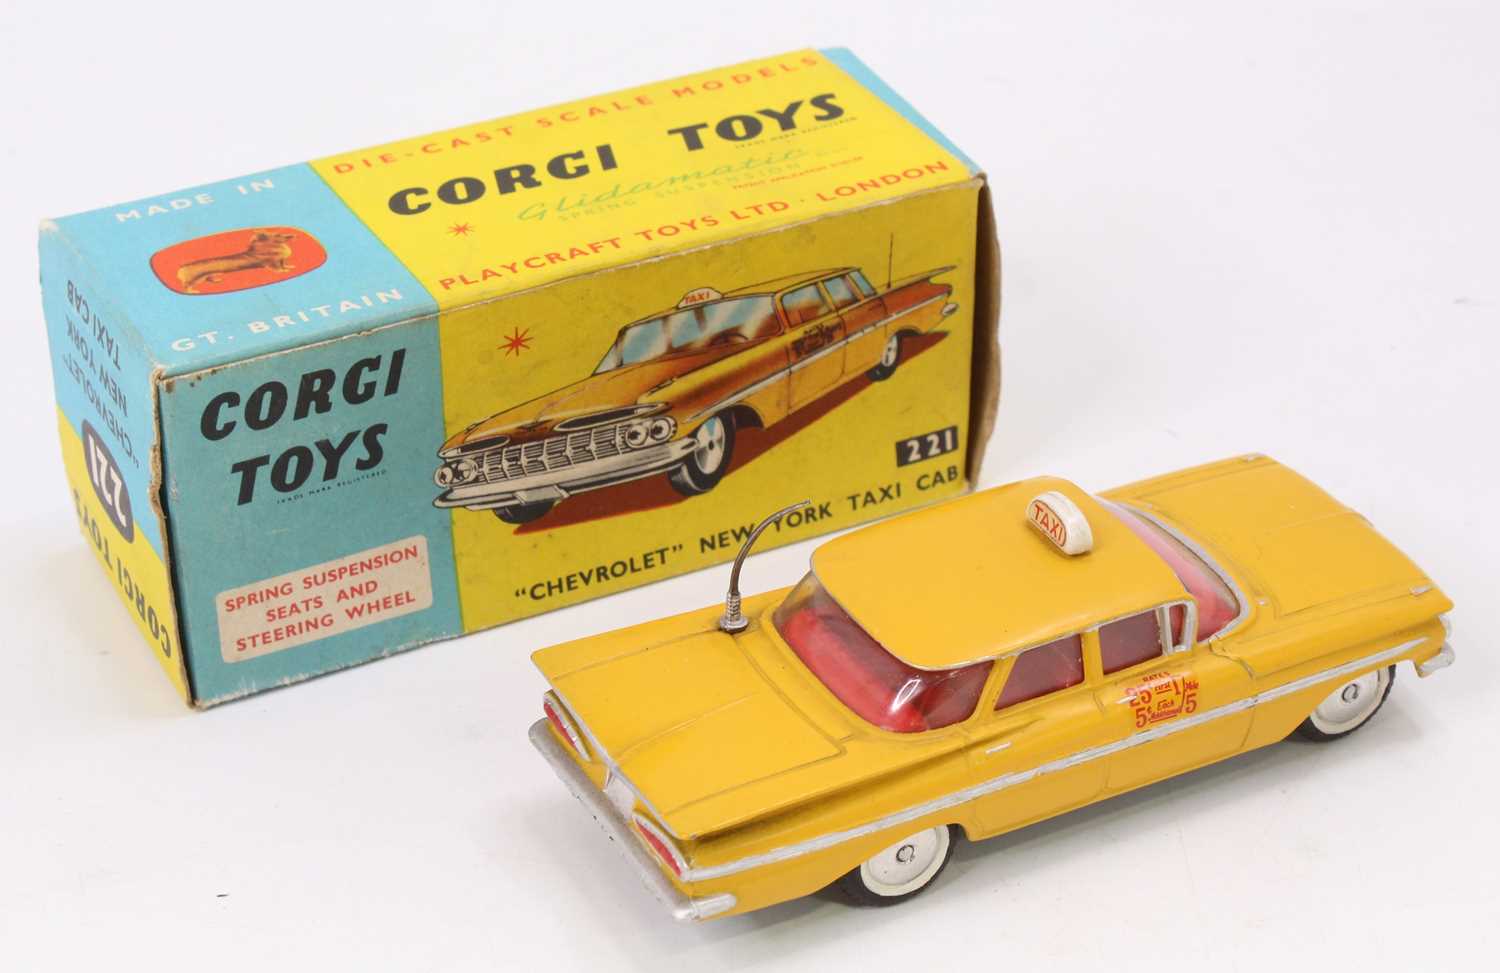 Corgi Toys No. 221 Chevrolet New York taxi cab in yellow with red interior and spun hubs and white - Image 2 of 2